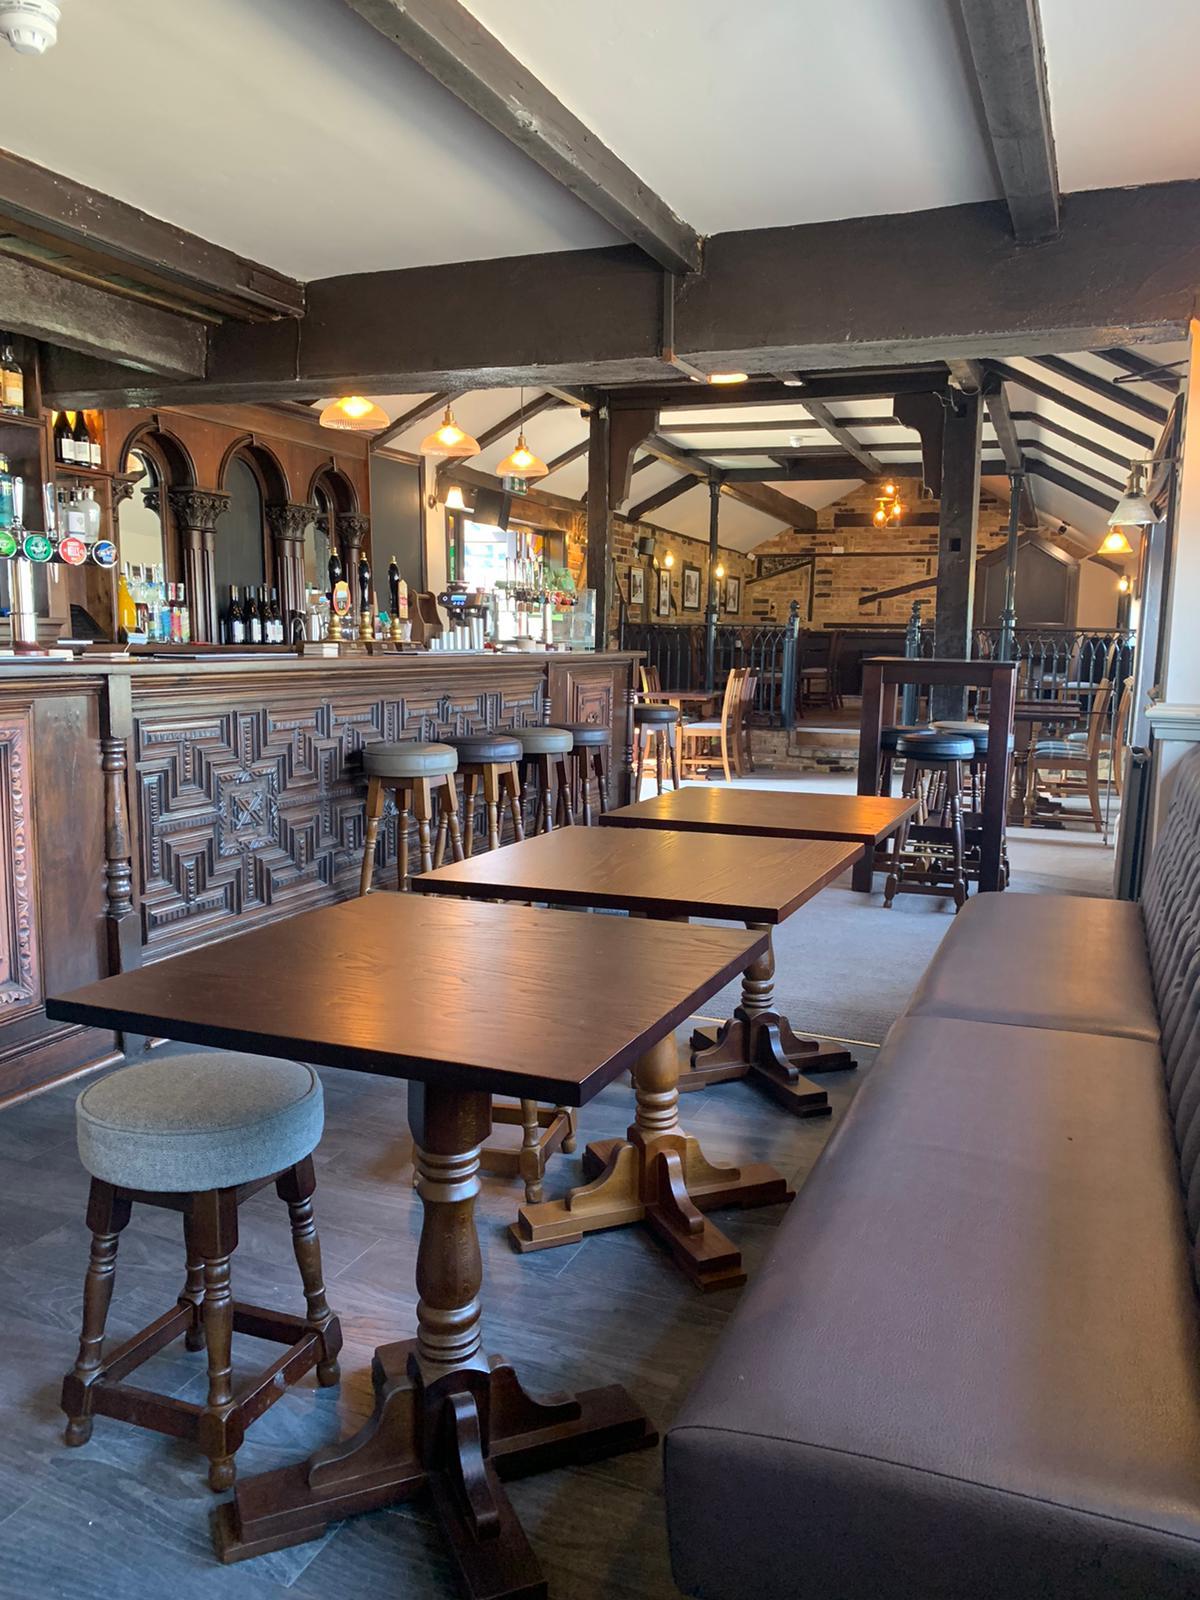 An inside look at the pub